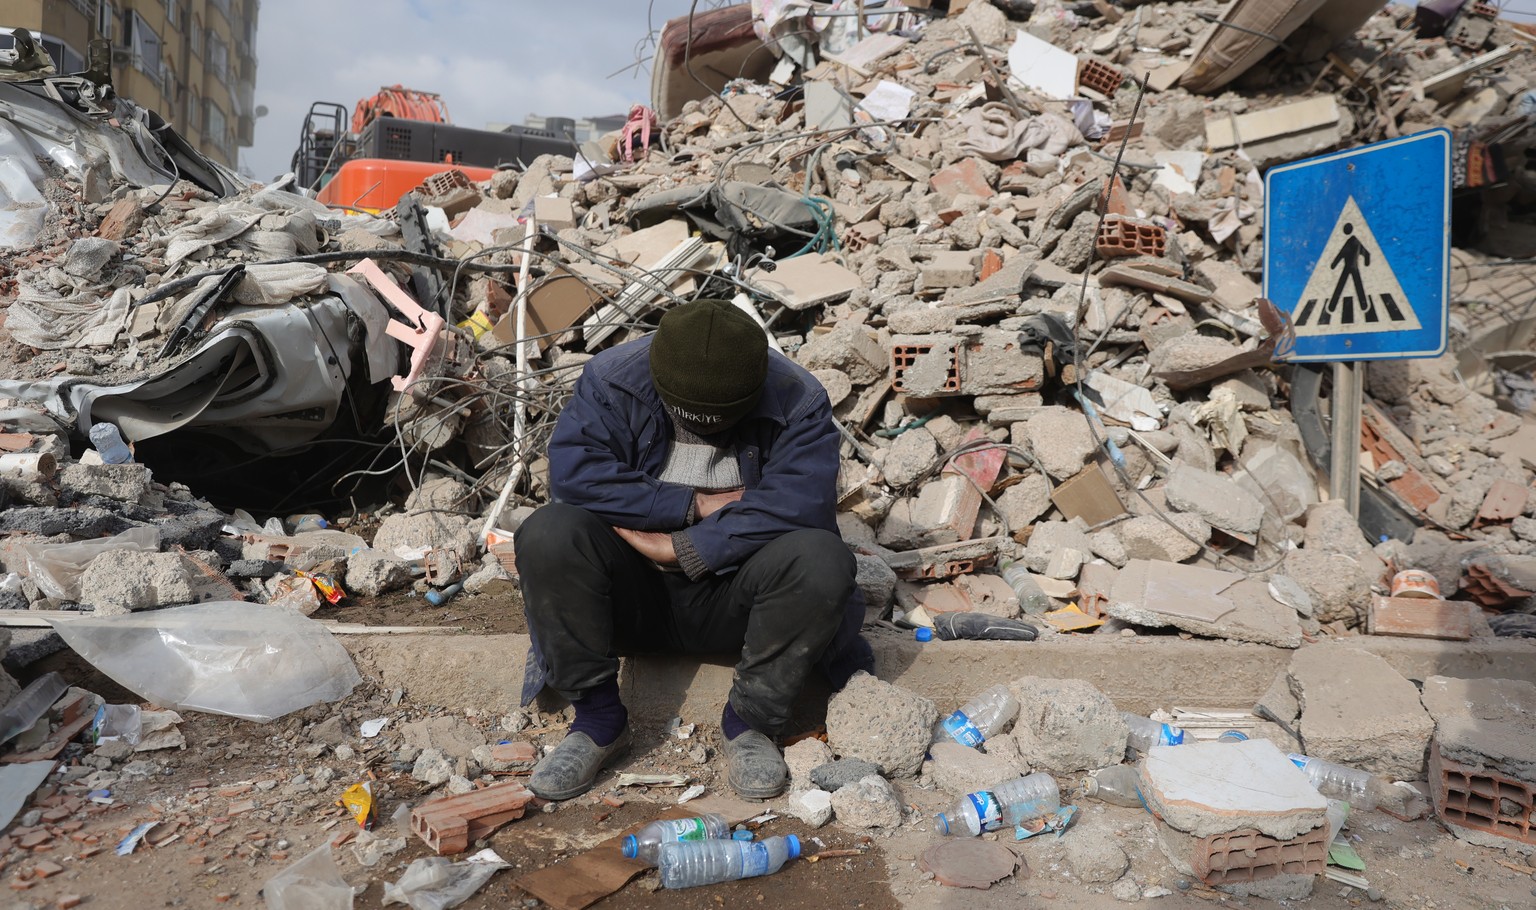 epa10458920 A man reacts at the site of a collapsed building following a powerful earthquake in the city of Kahramanmaras, Turkey, 10 February 2023. More than 21,000 people have died and thousands mor ...